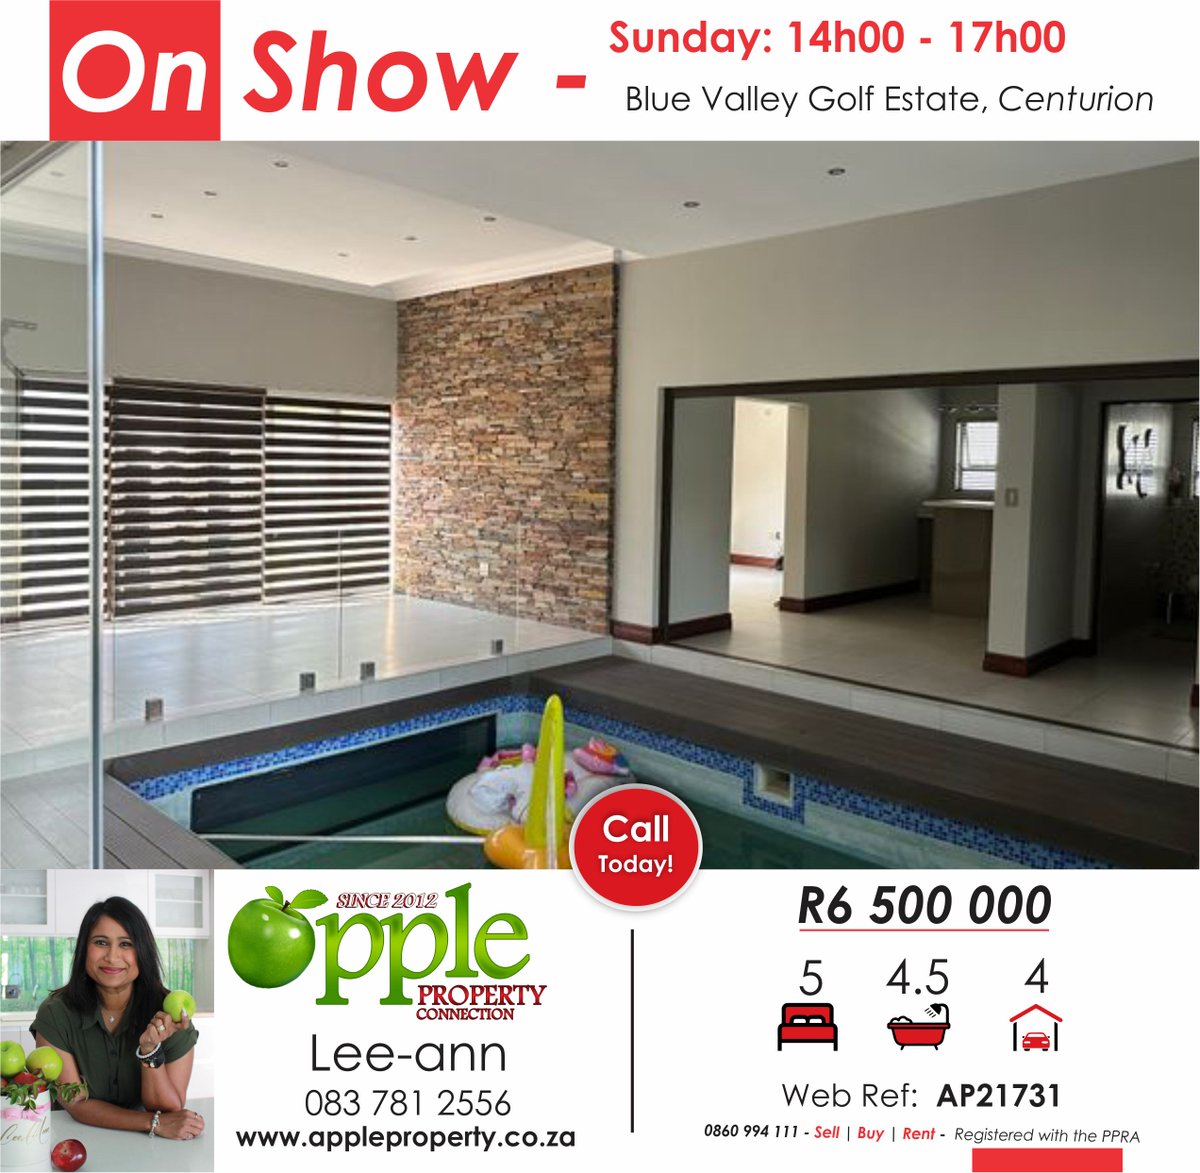 😎CHECK IT OUT!
🎉ONSHOW
#forsale #forrent
#midrand #bluevalleygolfestate #centurion #nationwide #ApplePropertyConnection
0860 994 111 | appleproperty.co.za